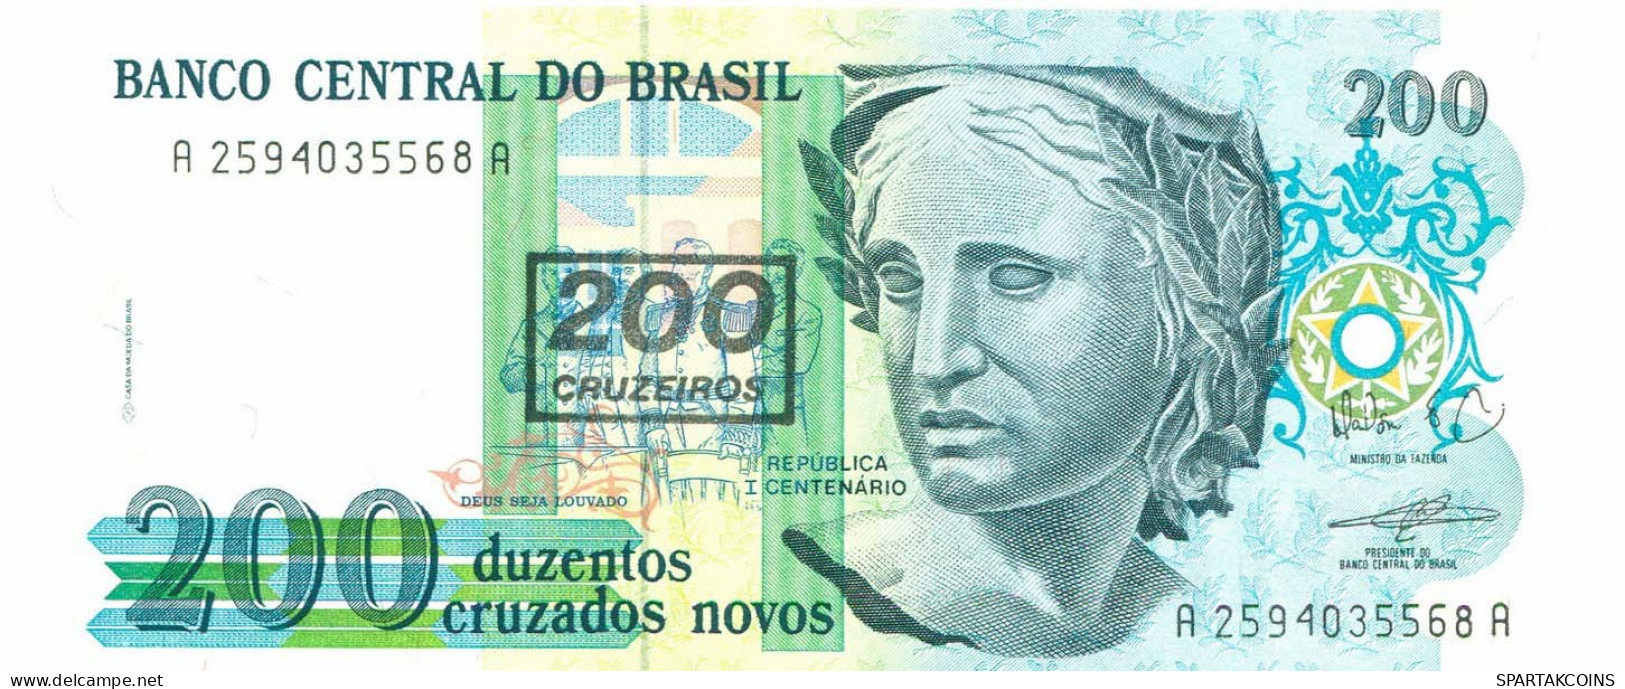 BRASIL 200 CRUZADOS 1990 UNC Paper Money Banknote #P10861.4 - [11] Local Banknote Issues